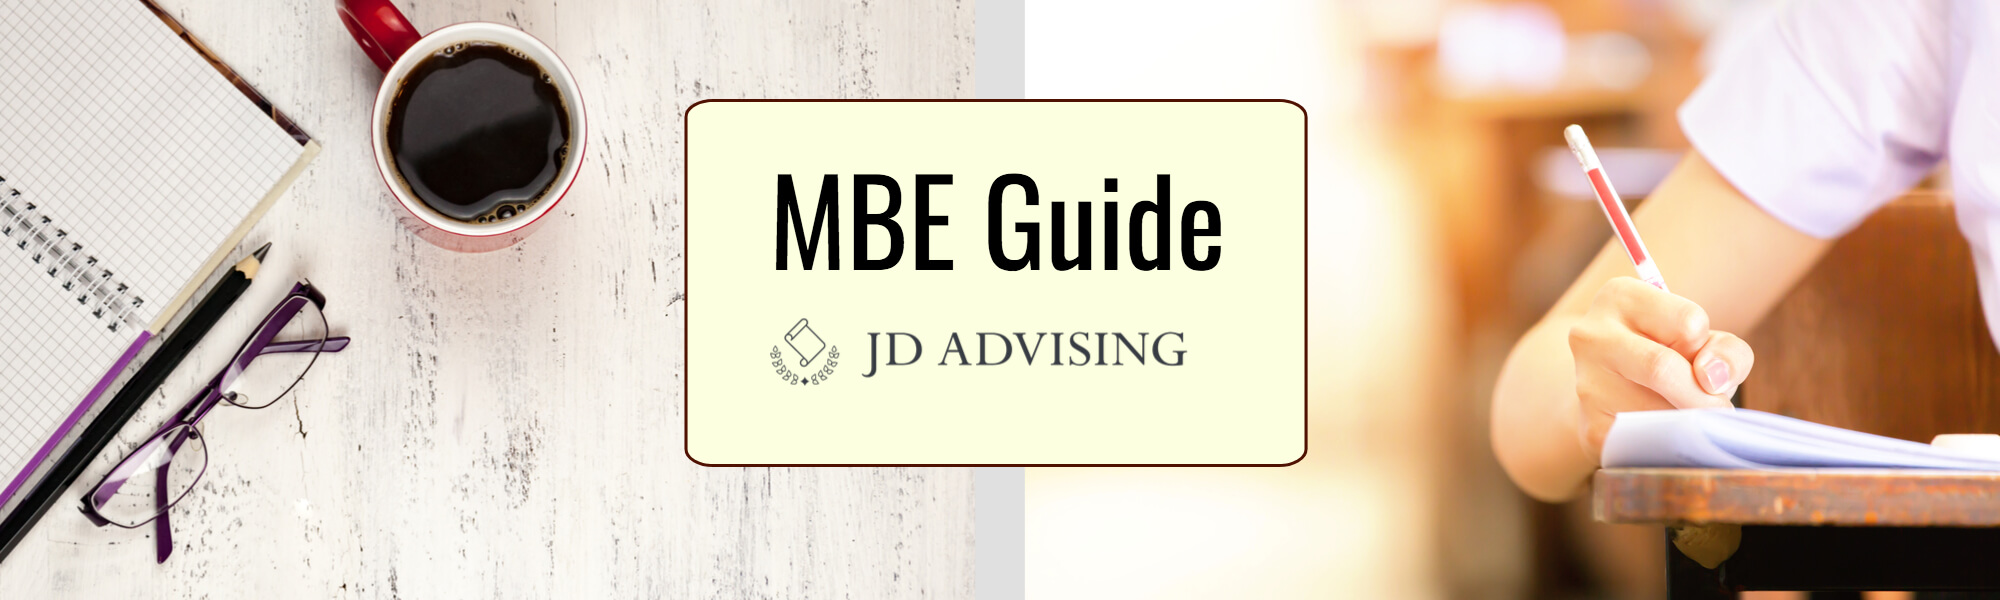 MBE guide, multistate bar exam guide,